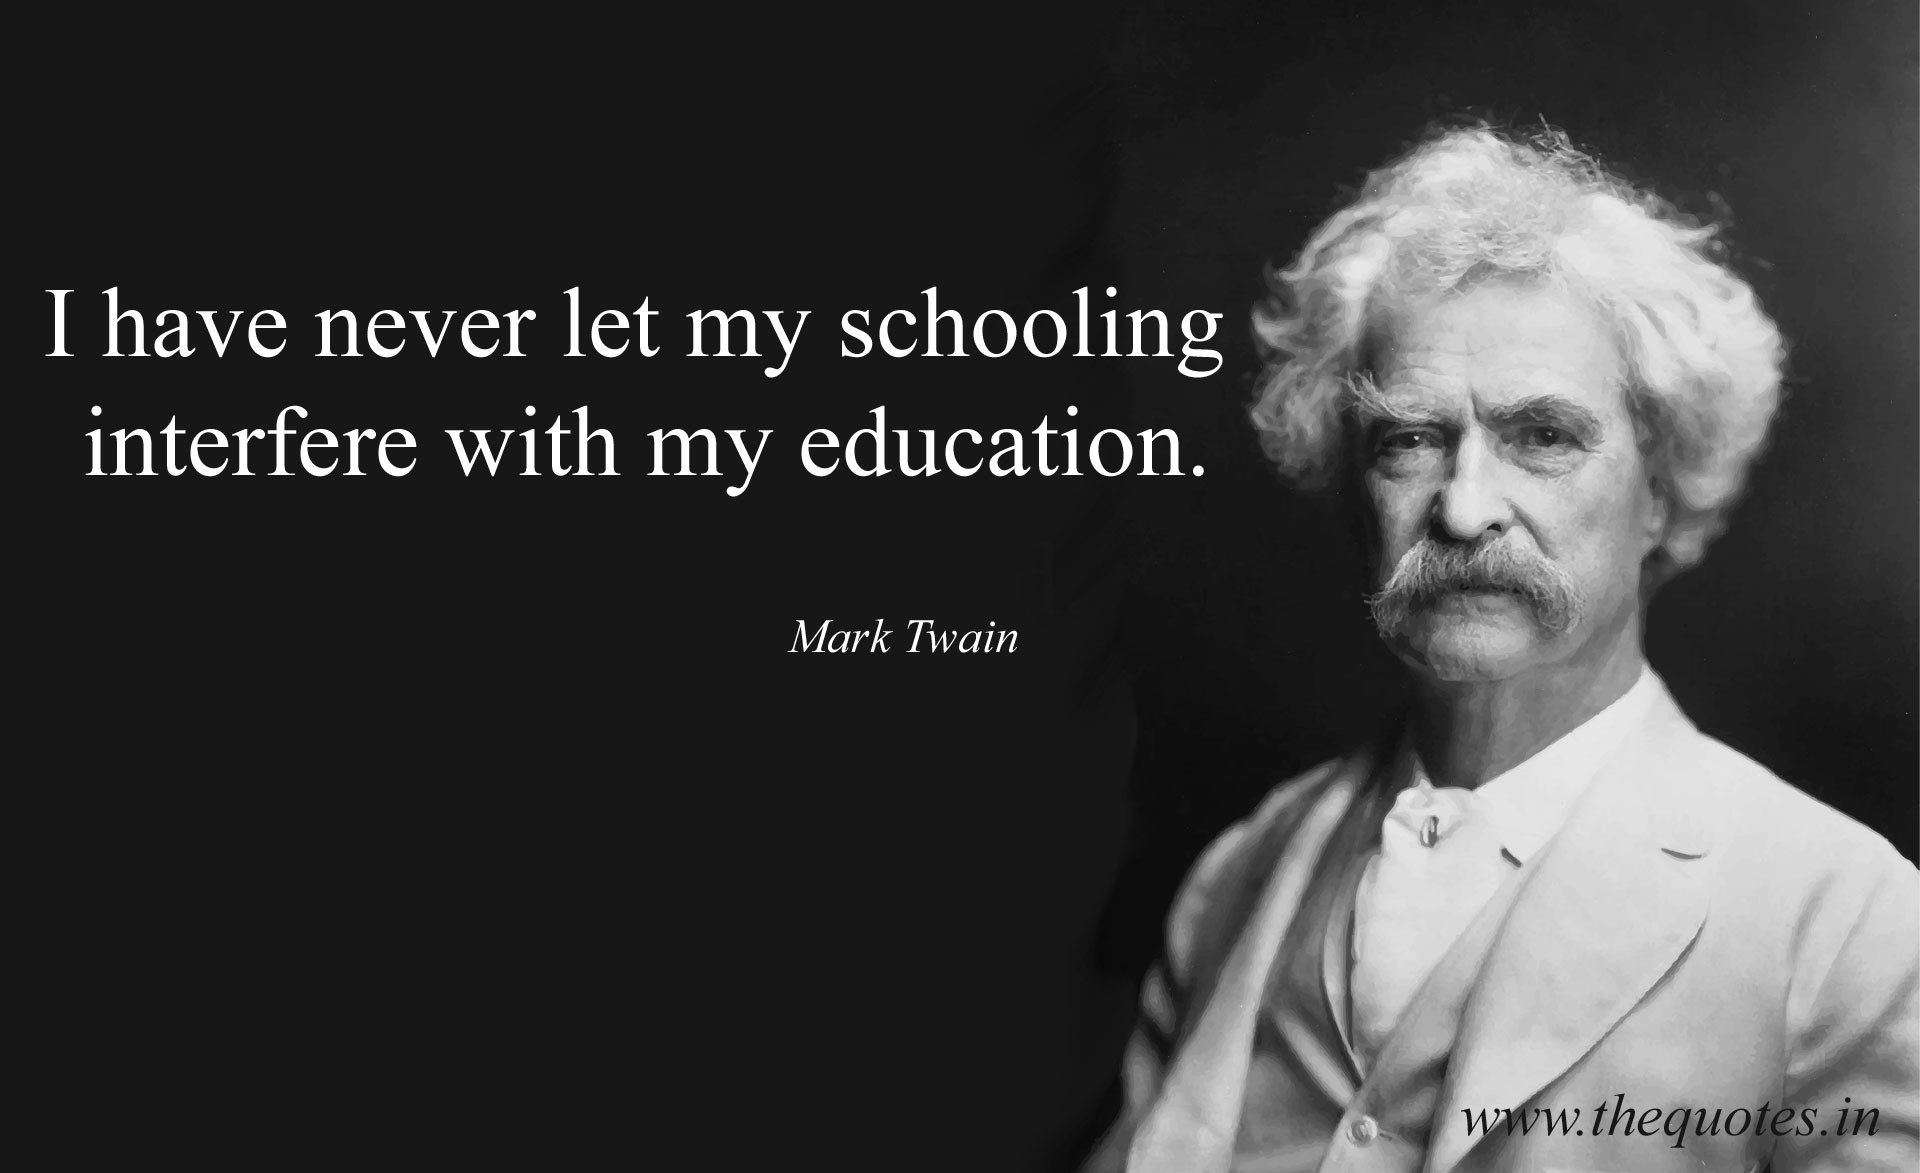 Mark Twain Quotes Education
 Mark Twain Education Quote QUOTES BY PEOPLE